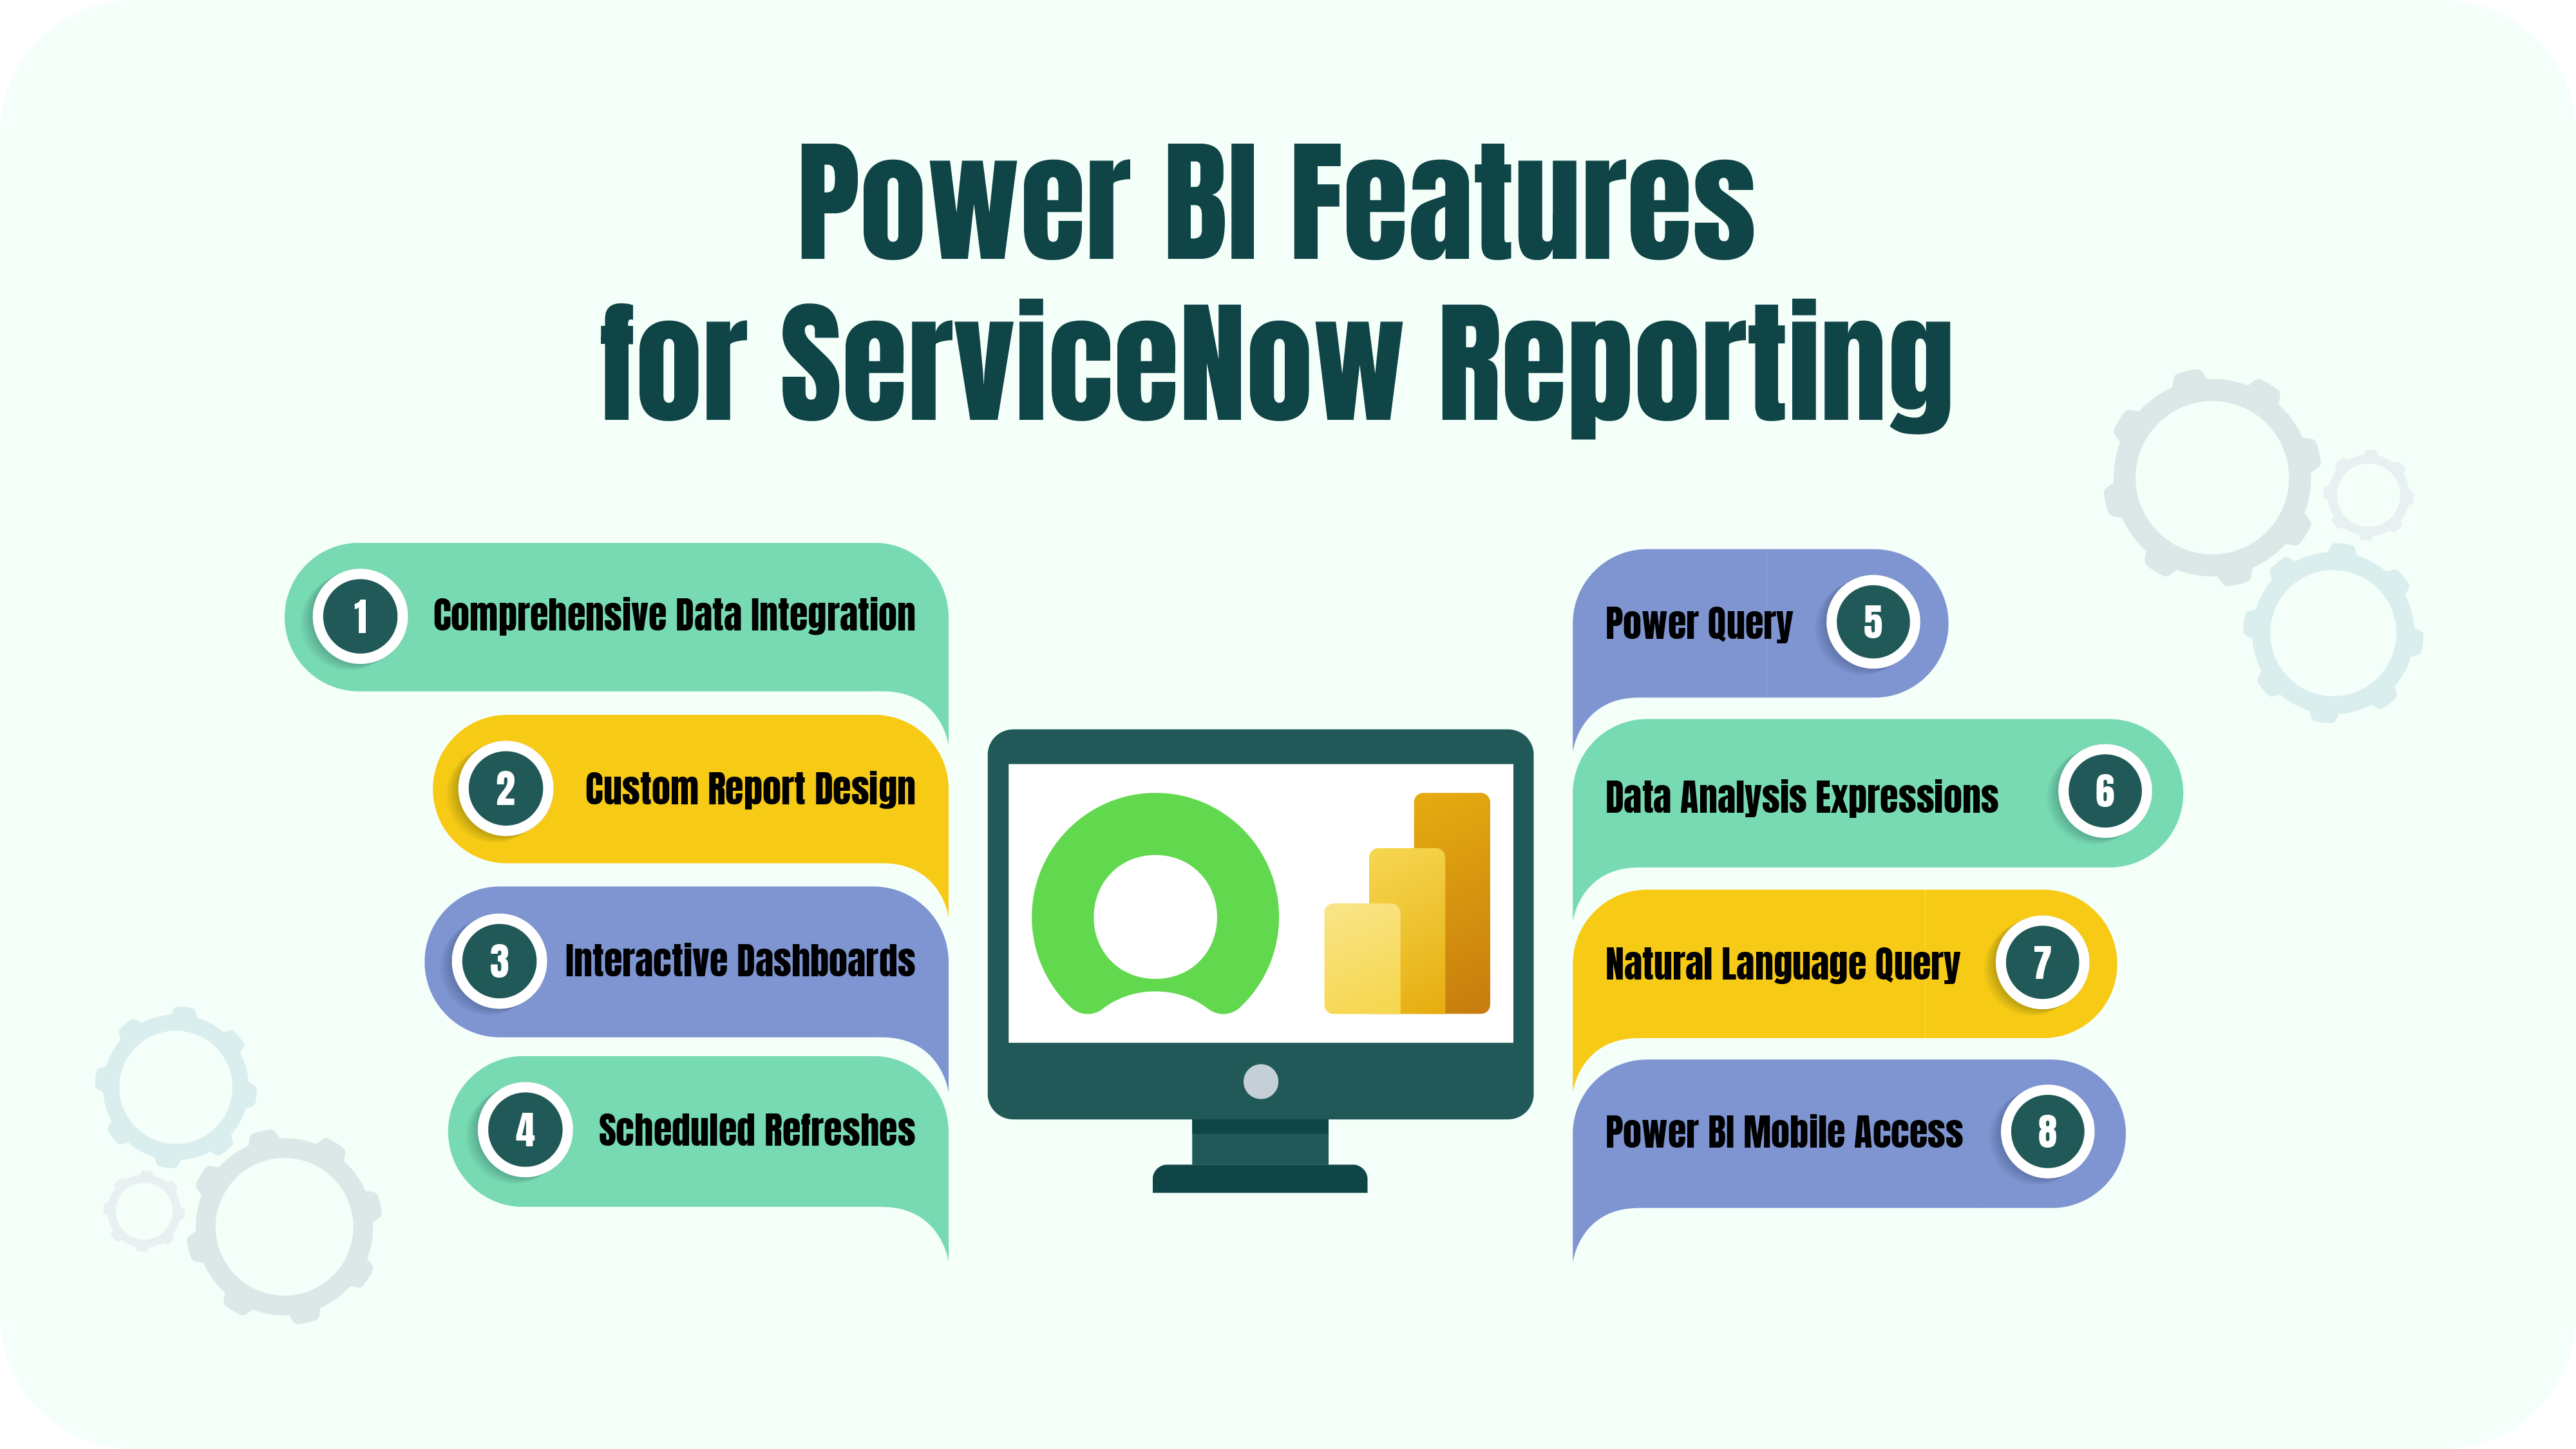 Why Use Power BI for ServiceNow Reporting